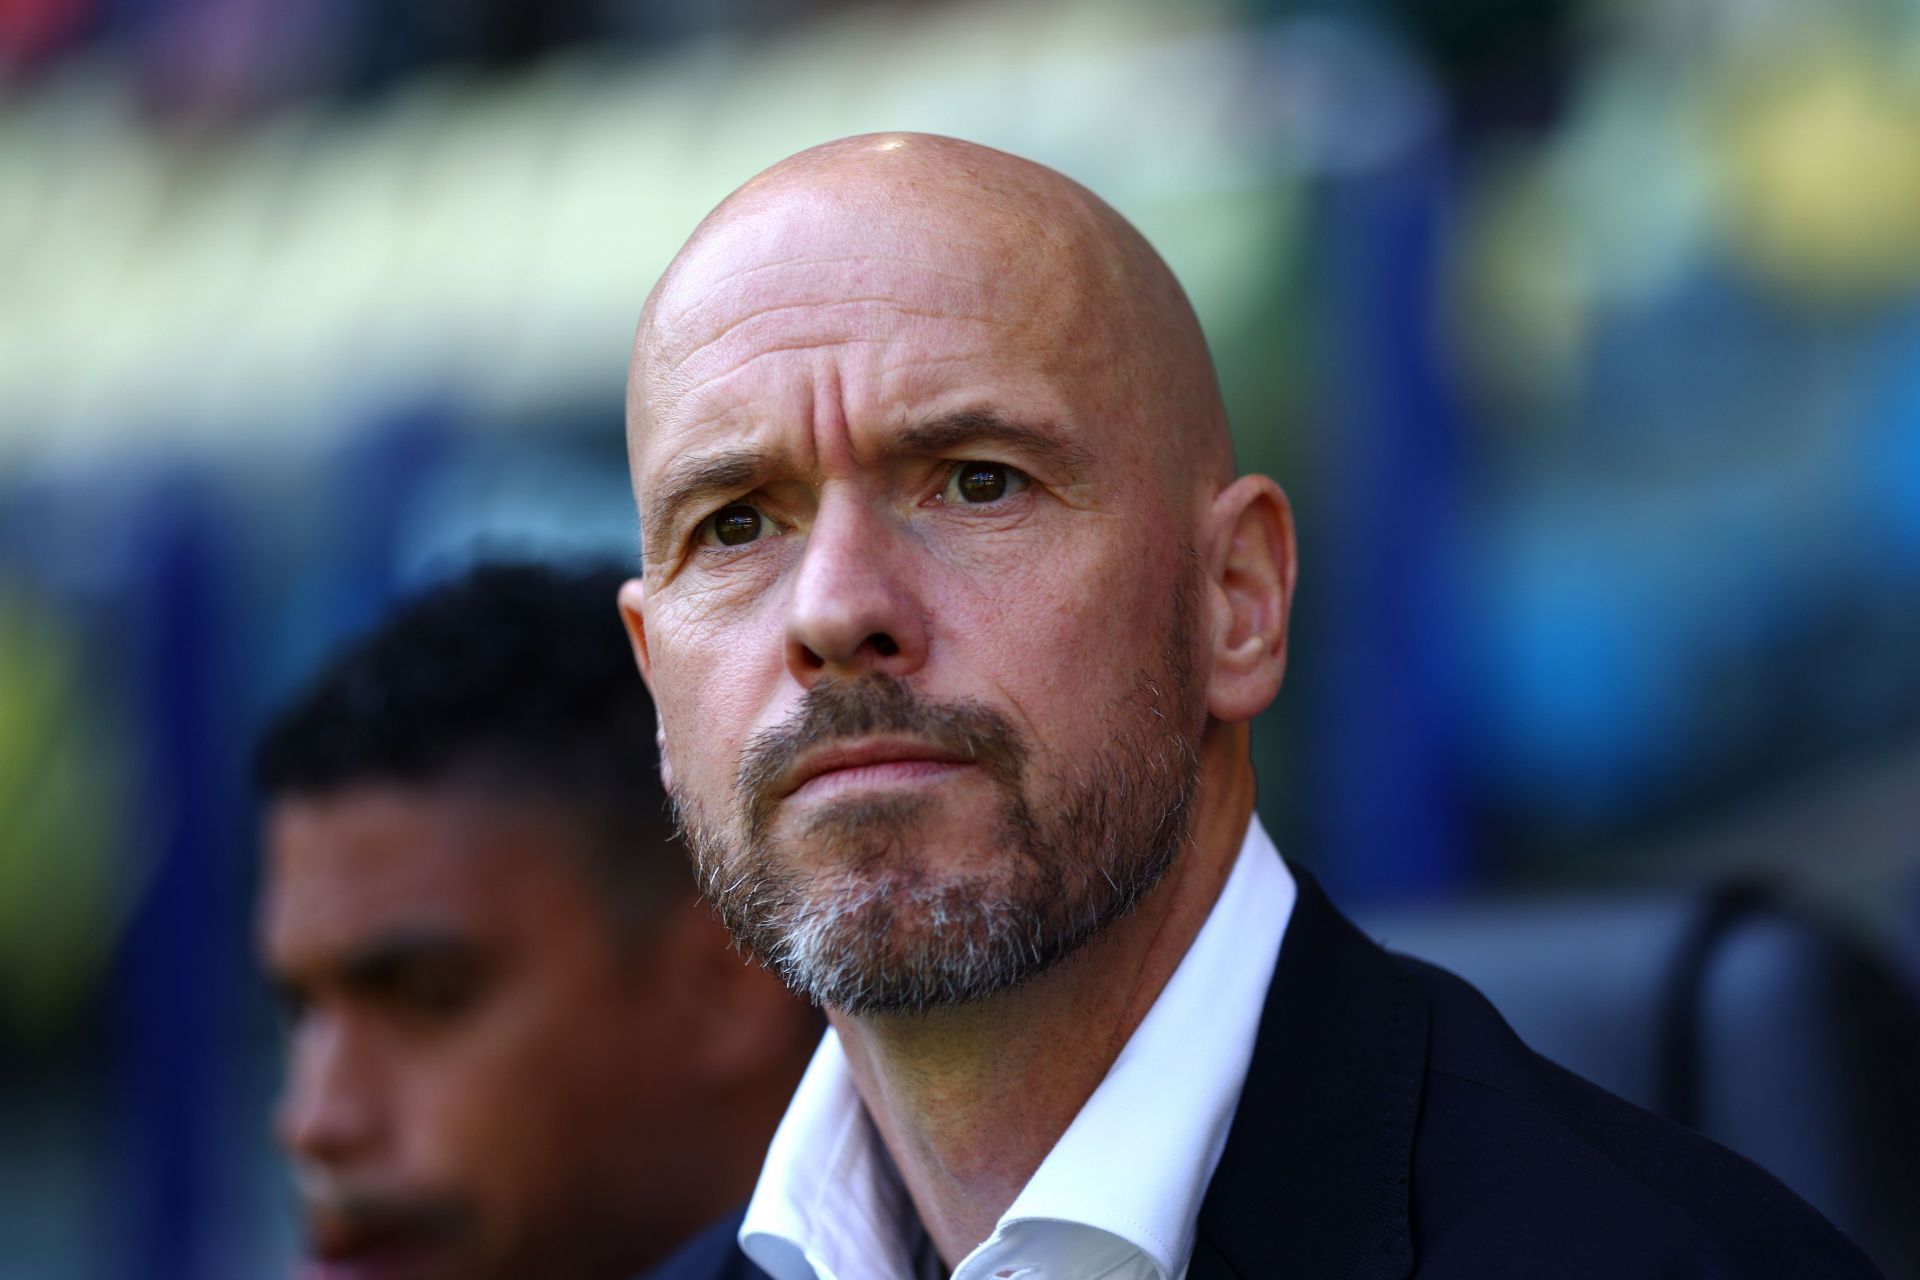 Erik ten Hag will attempt to get Manchester United back on track